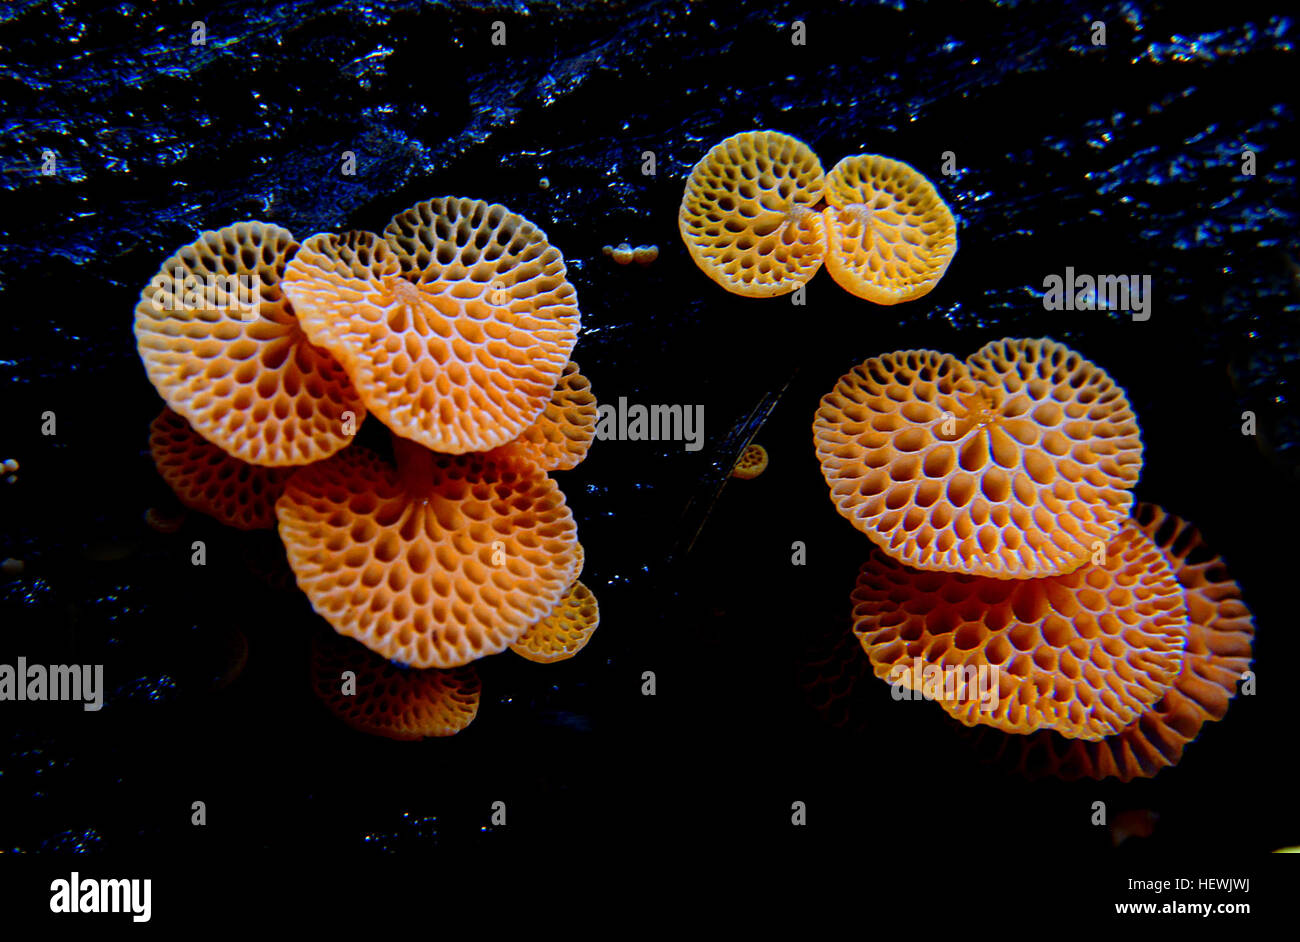 This little fungus is very bright orange in colour. It is fan shaped like a ping pong bat, with a short stem (up to 20 mm long), attached to the side of the cap and to logs or dead branches. Instead of gills it has large pores giving it a honeycombed appearance. The pores are visible through the thin flesh. The fungus is 5-40 mm diameter. Stock Photo